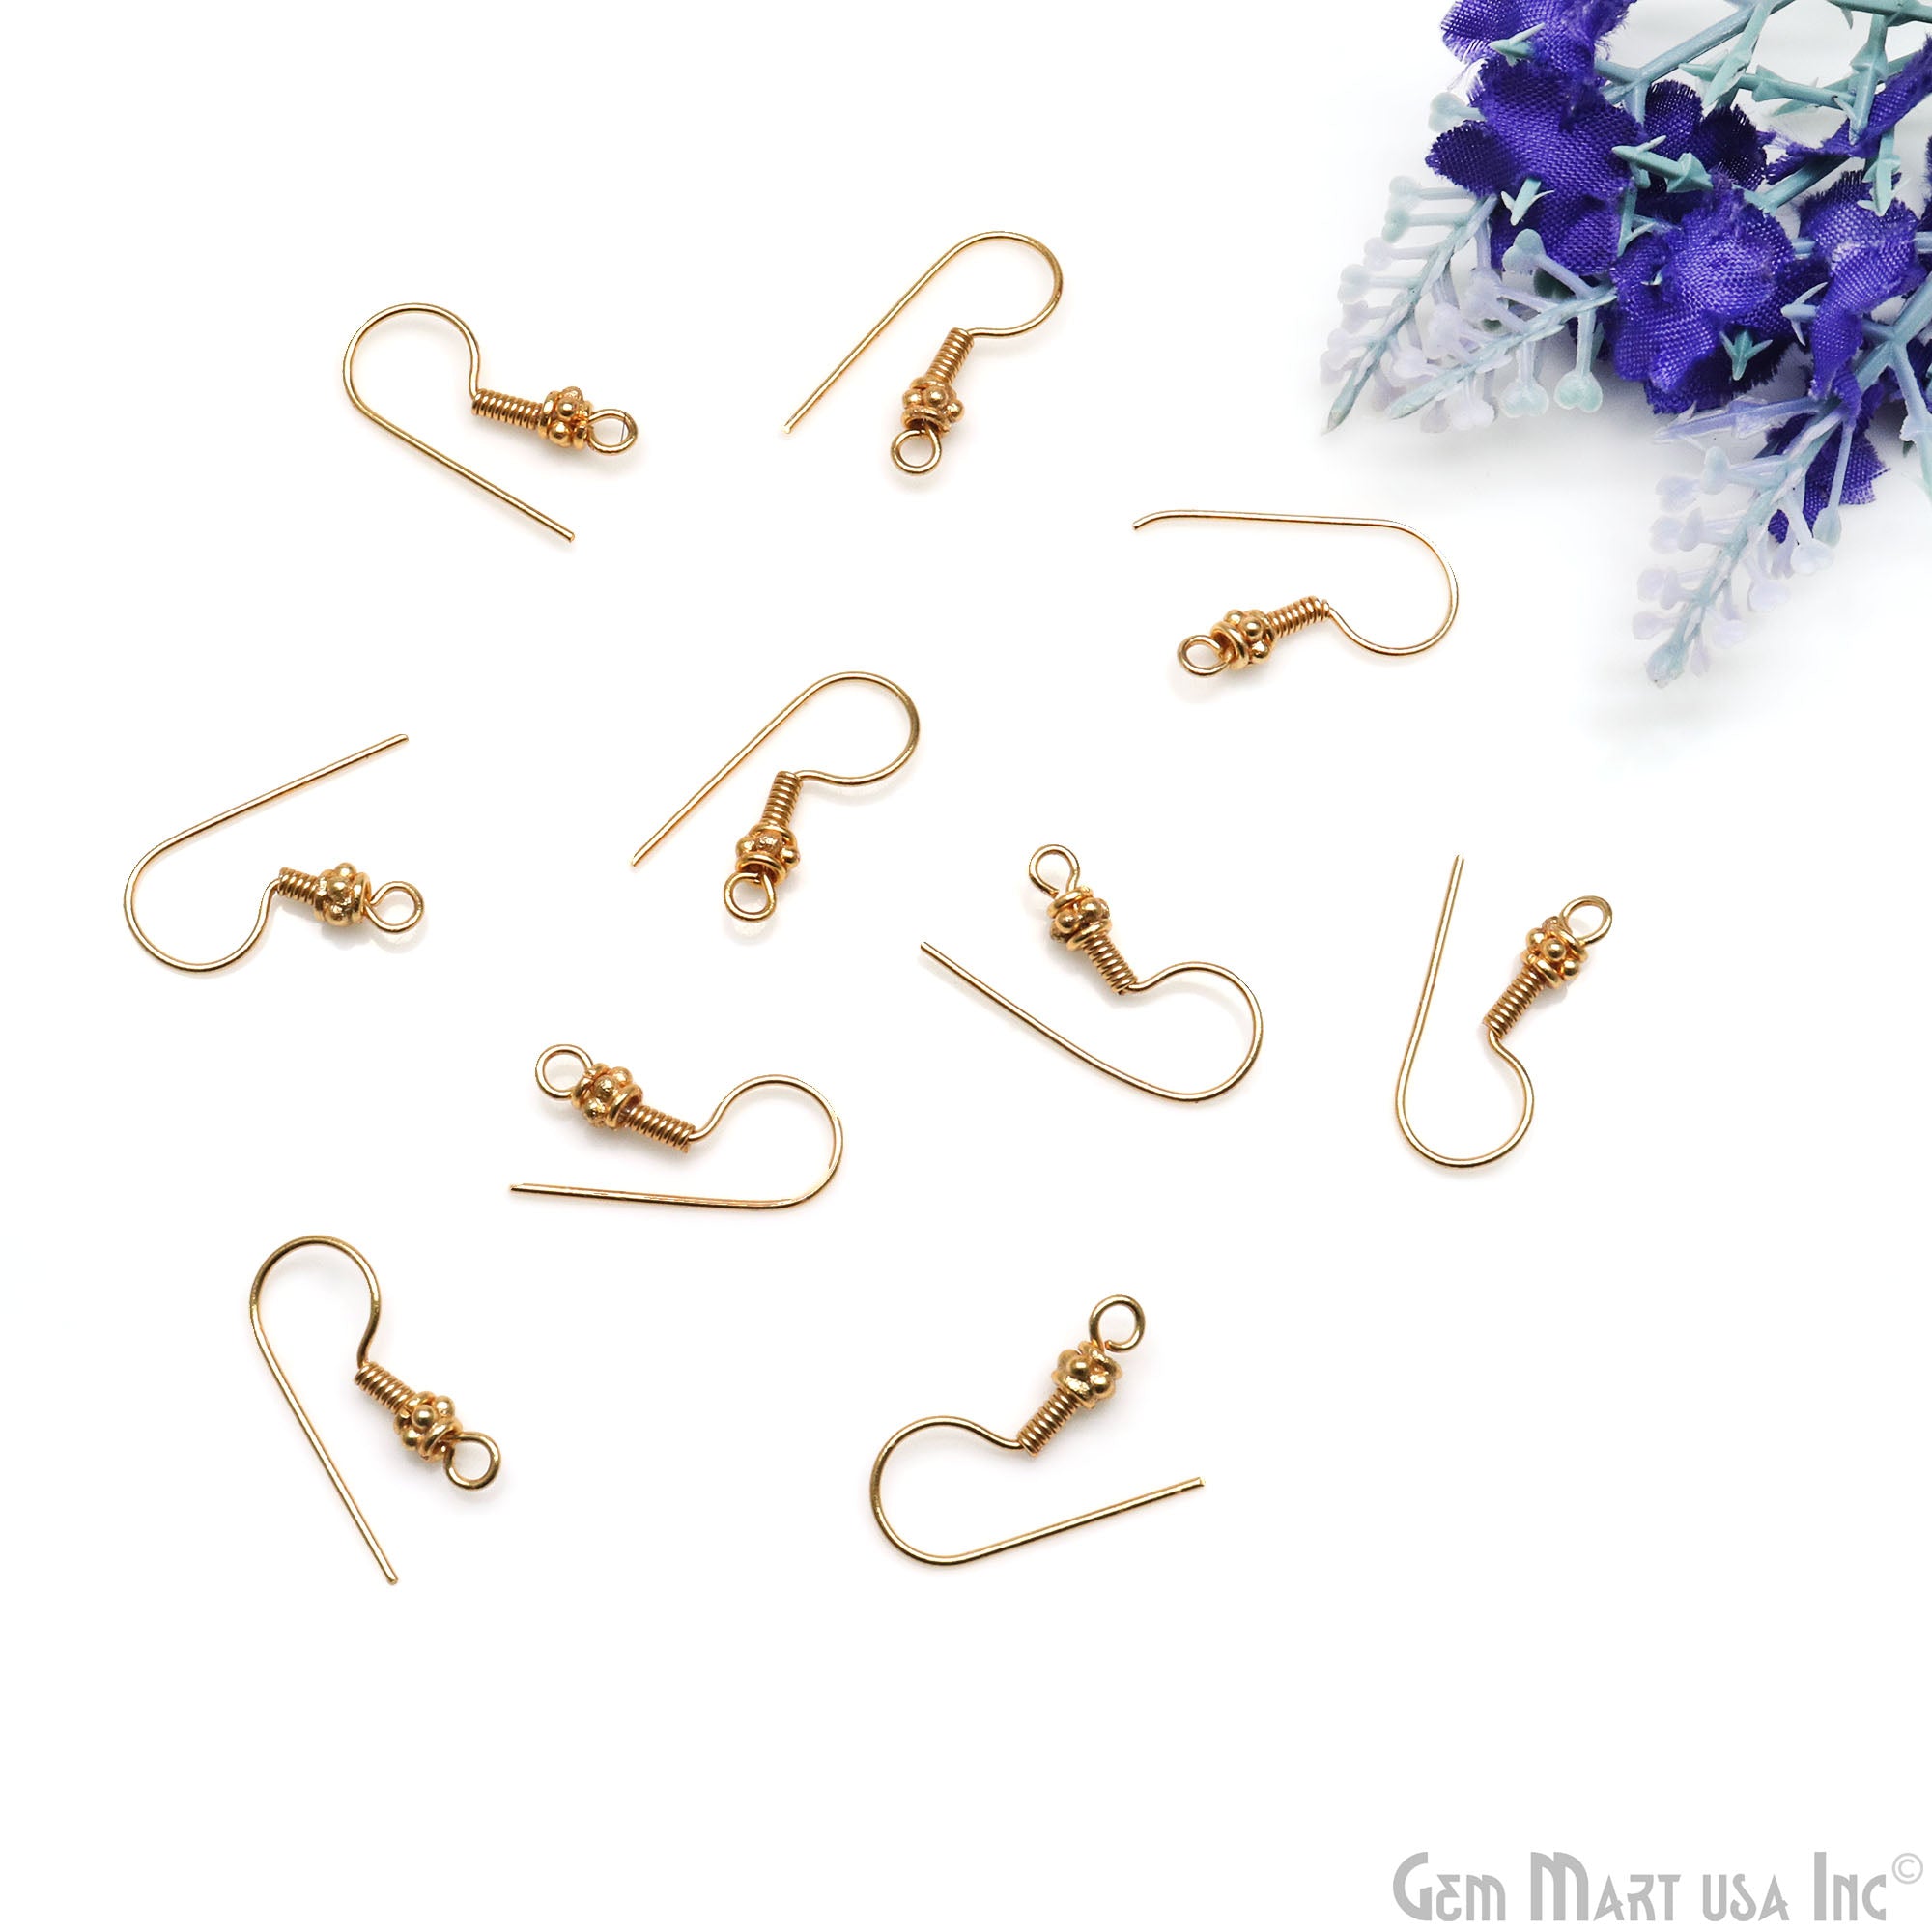 5 Pair Lot Gold Plated 23x9mm Earring Fish Hooks Findings